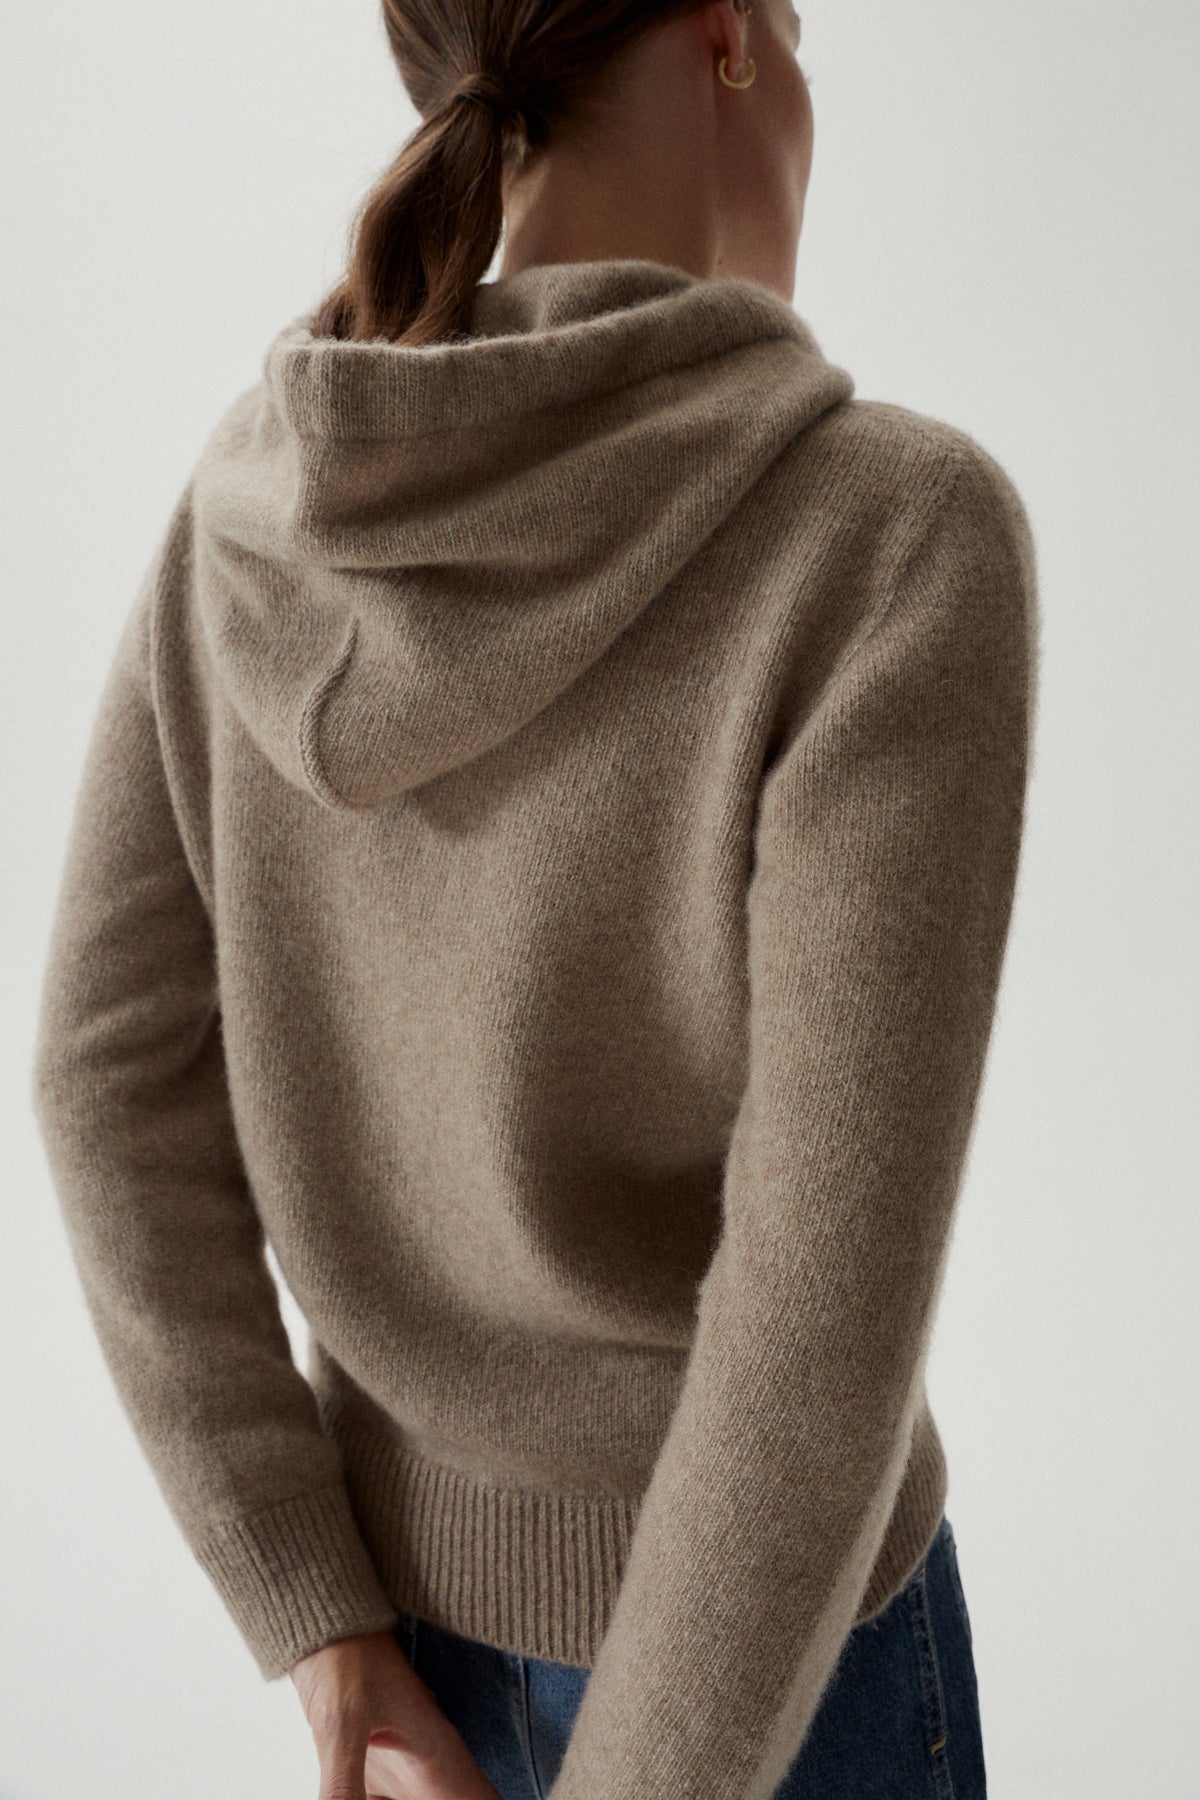 Camel | The Upcycled Cashmere Hoodie – Imperfect Version